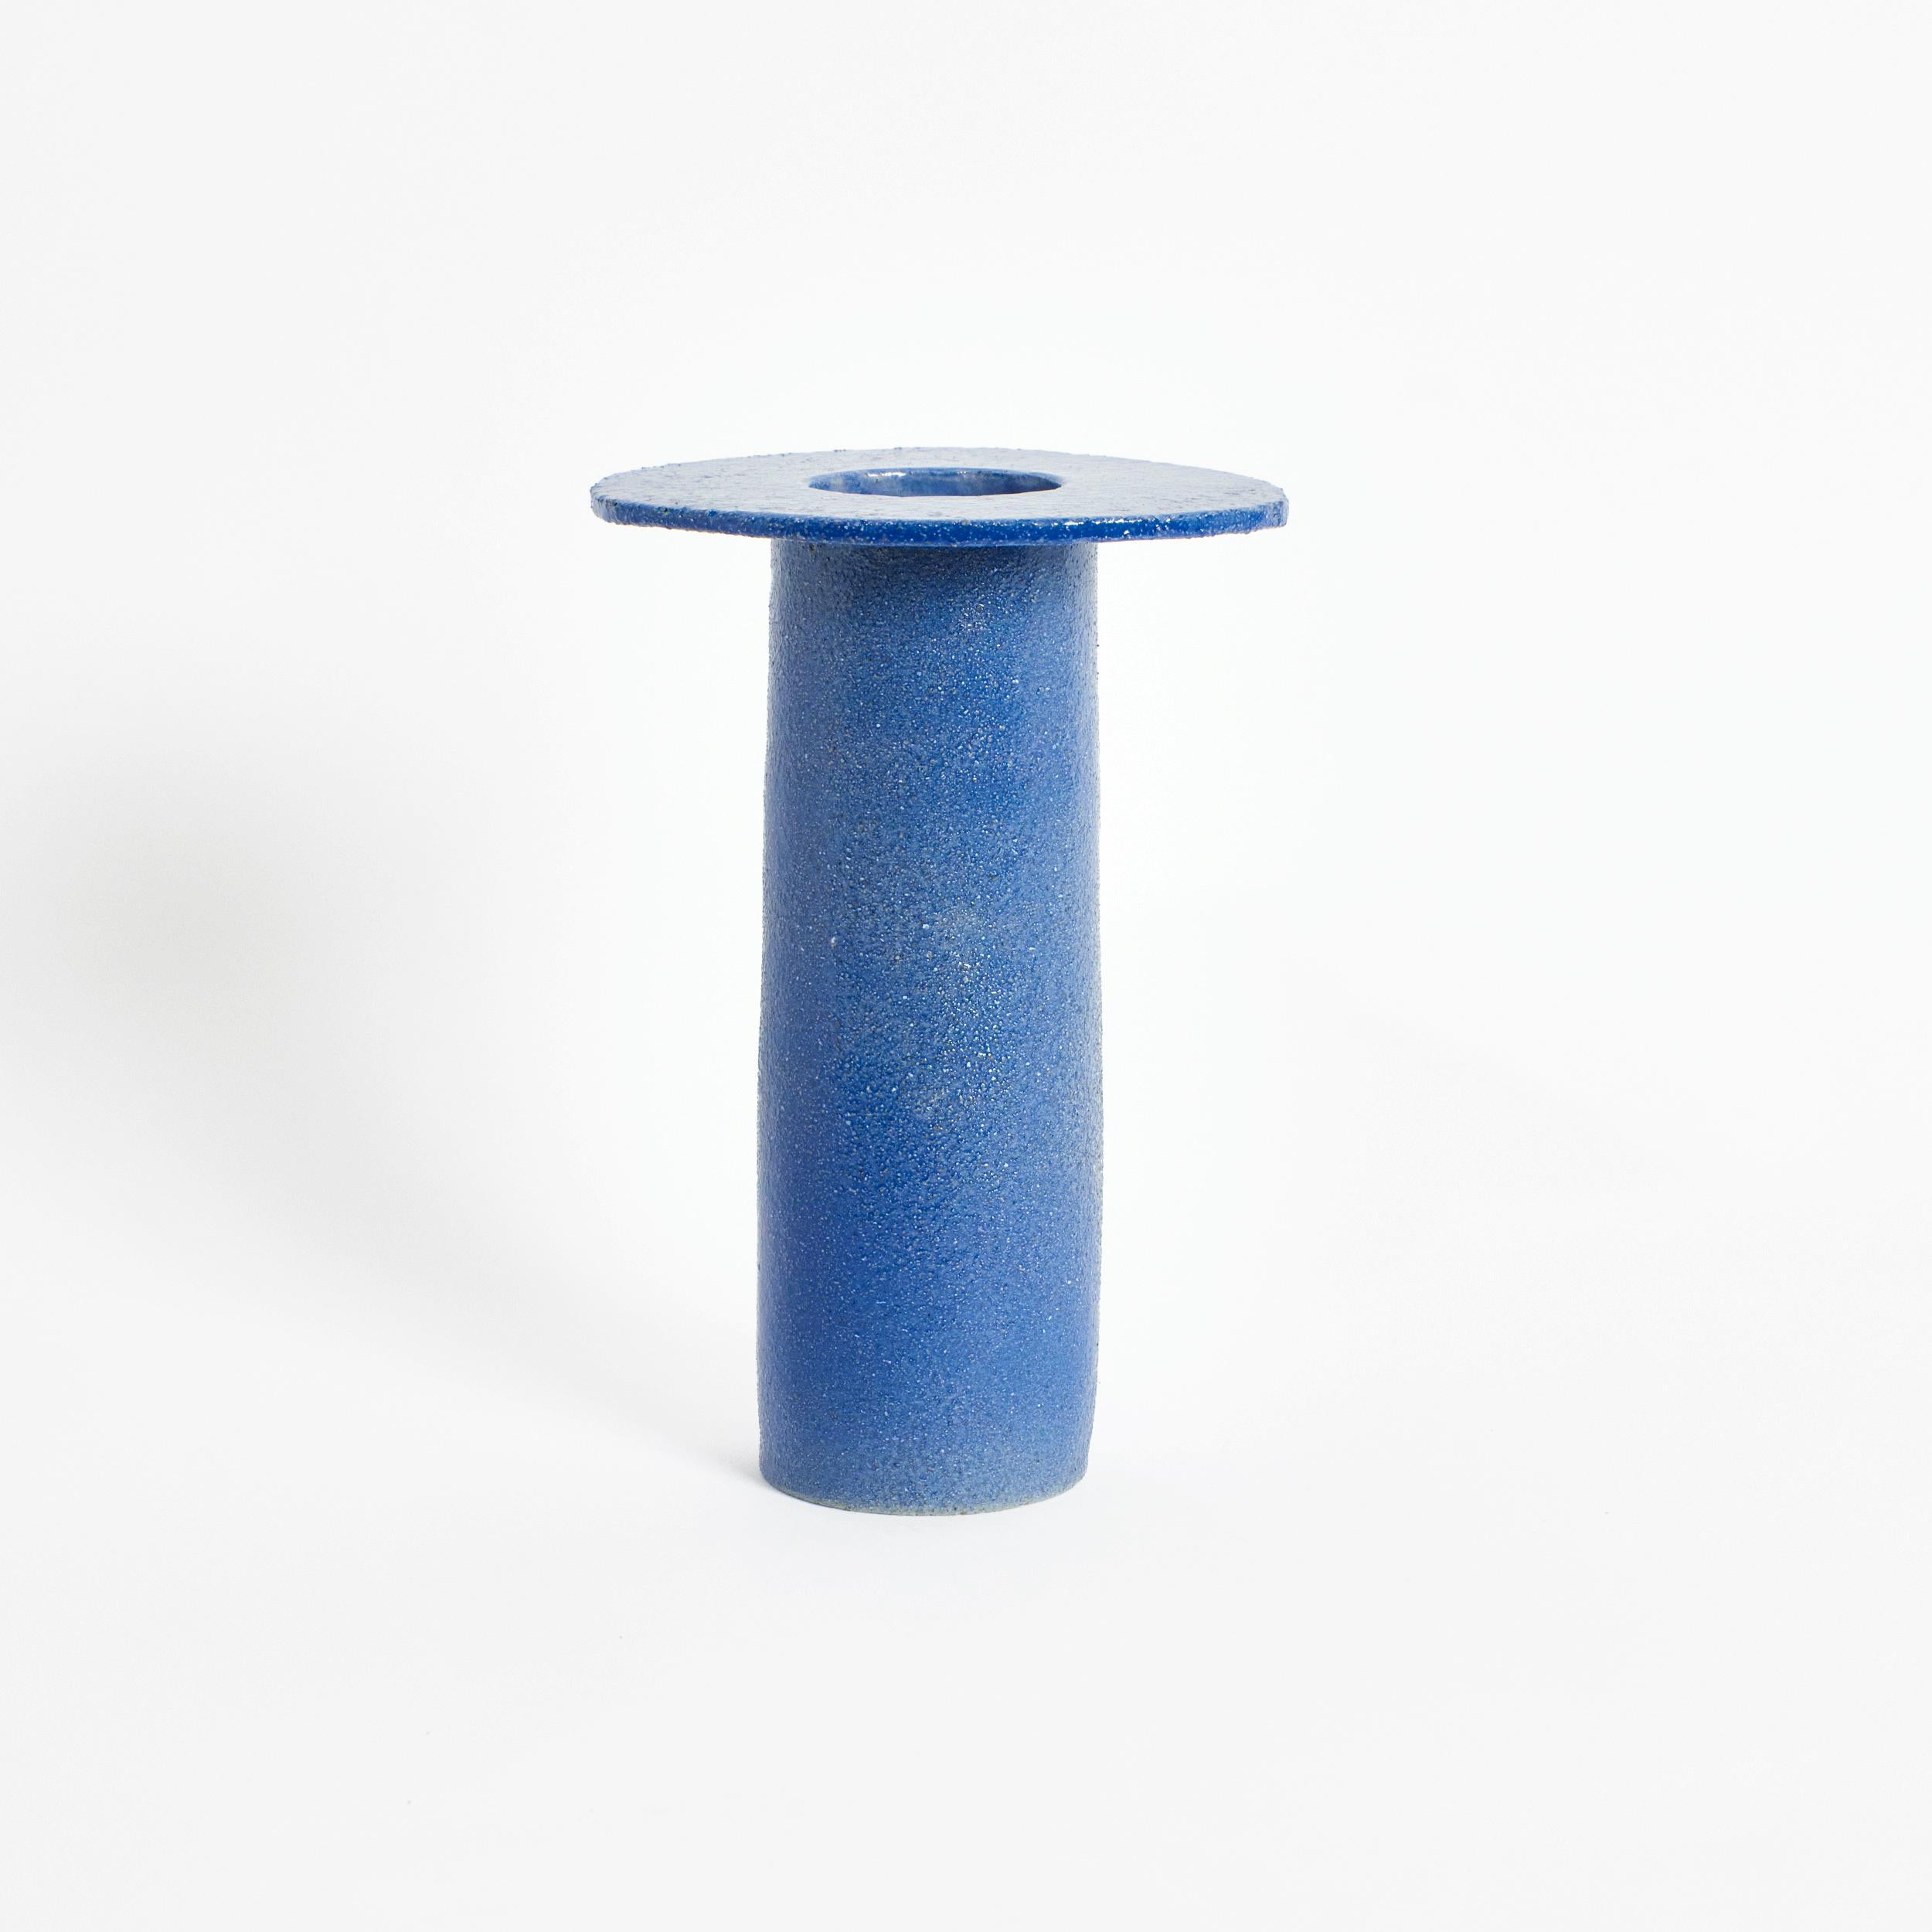 Post-Modern Cylinder Vase in Blue by Project 213A